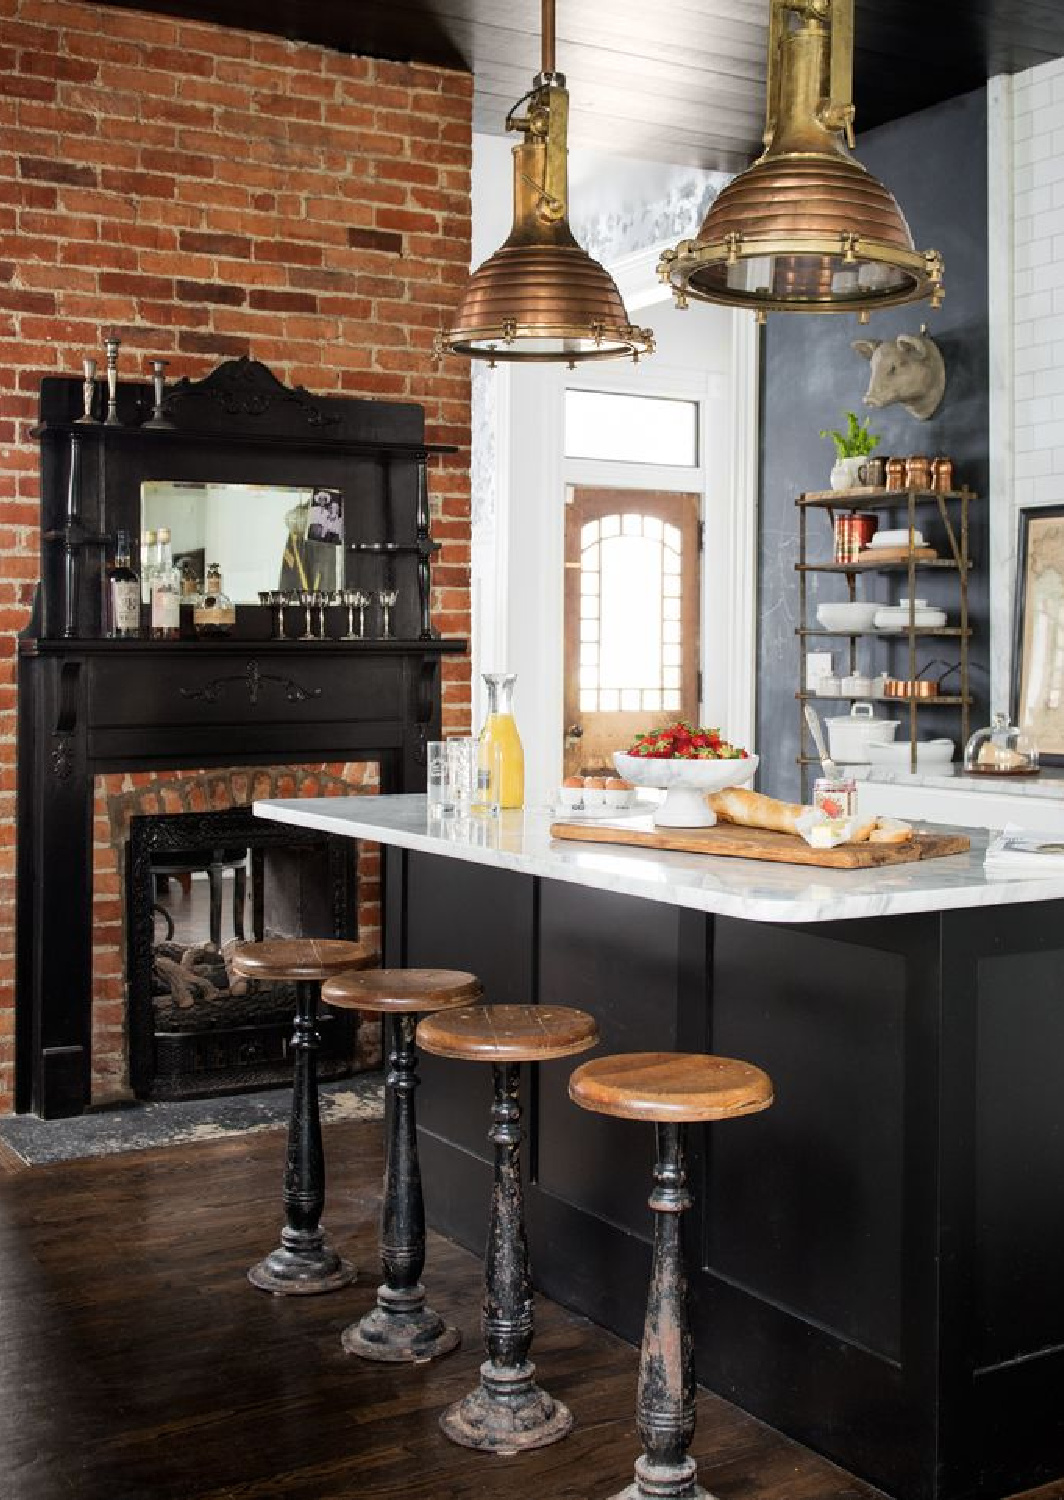 Black kitchen with red brick fireplace in a 1908 Nashville home by Holly Williams (photo: Paul Costello). #blackkitchens